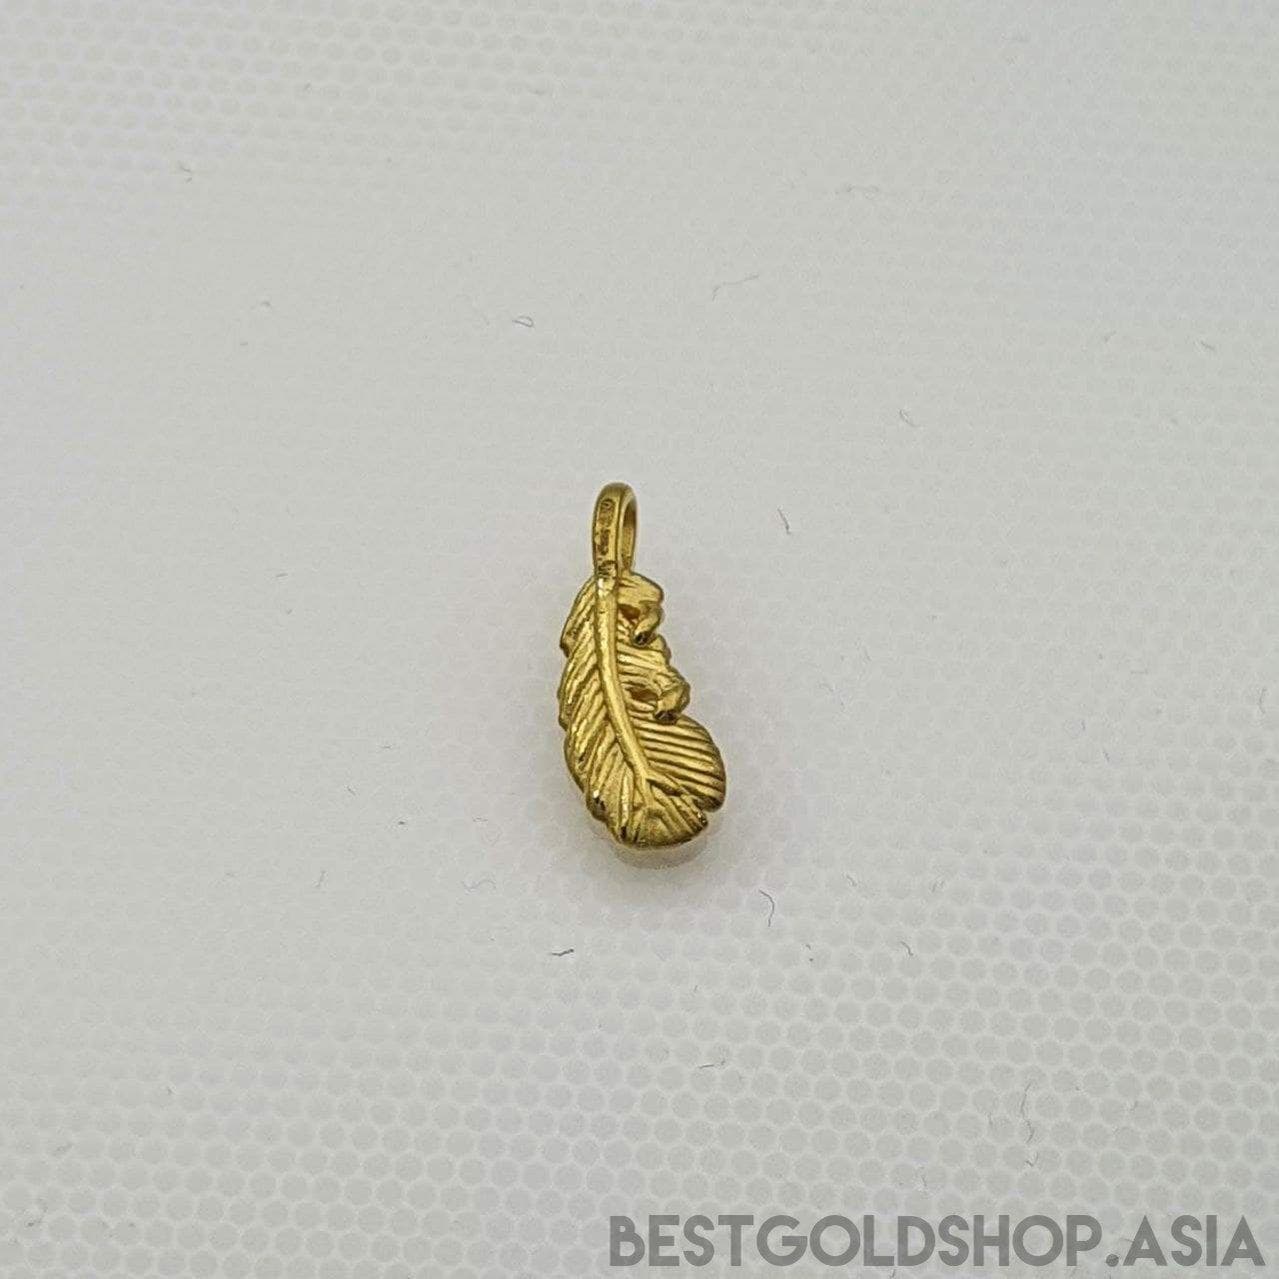 999 / 24k Gold Feather pendant Small-999 gold-Best Gold Shop